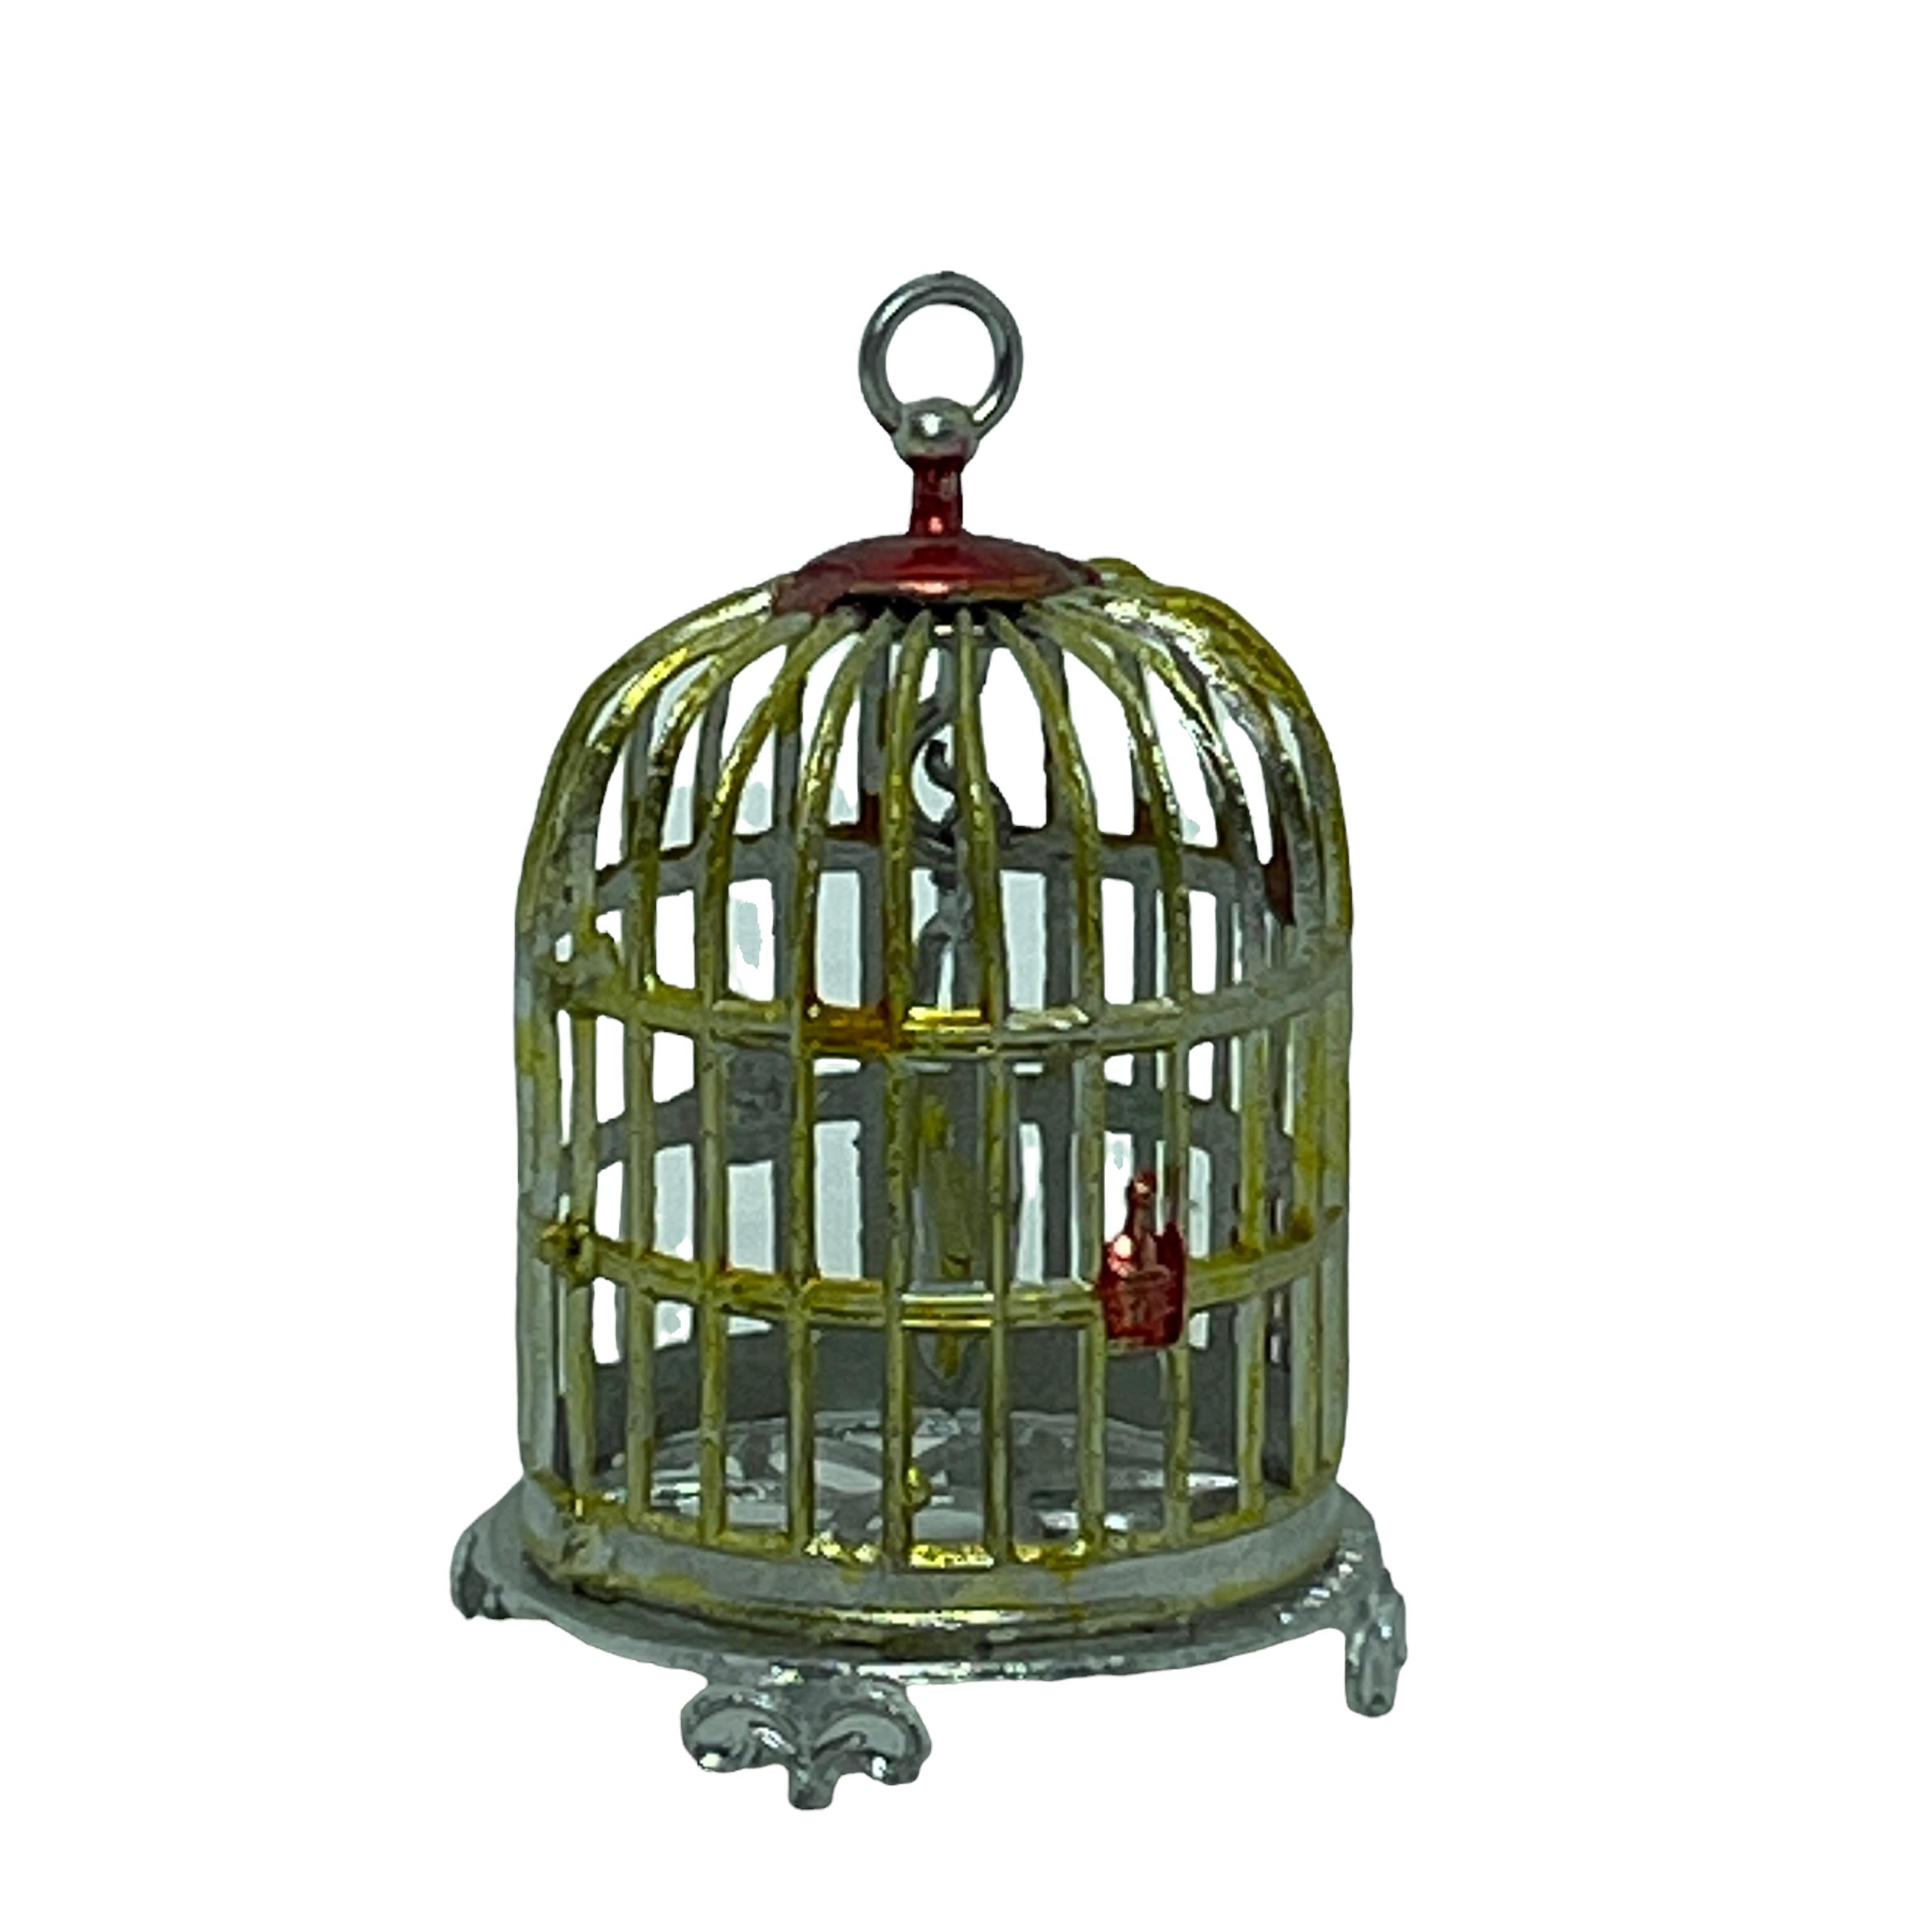 Antique Dollhouse Pewter Bird Cage with Bird, By Babette Schweizer, Germany In Good Condition For Sale In Nuernberg, DE